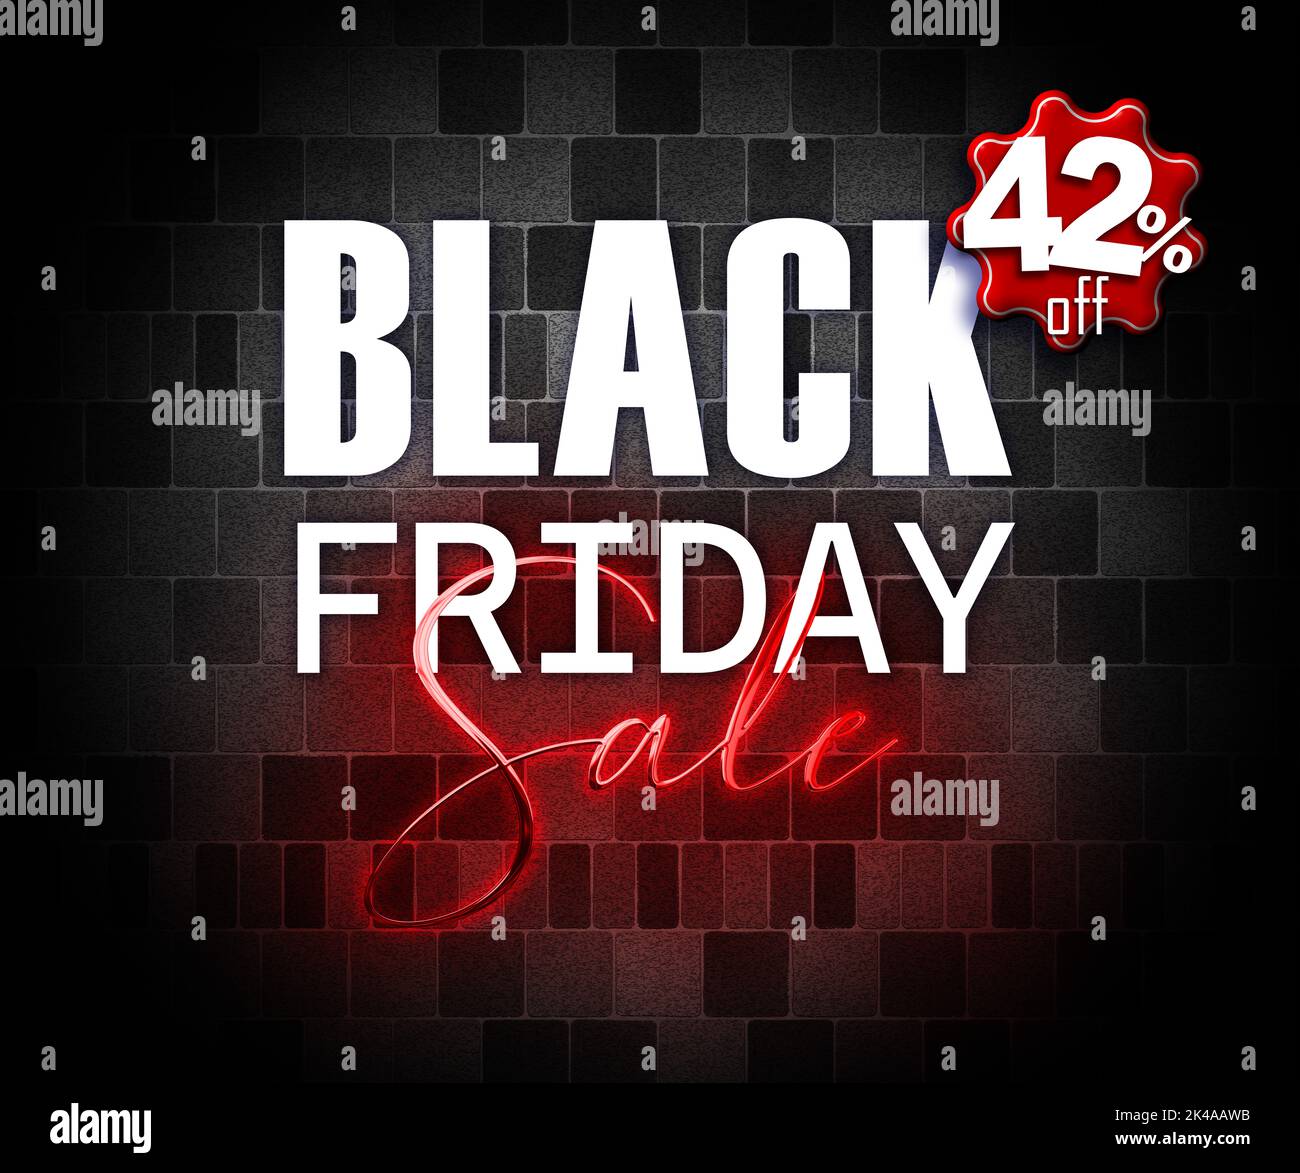 illustration with 3d elements black friday promotion banner 42 percent off sales increase Stock Photo